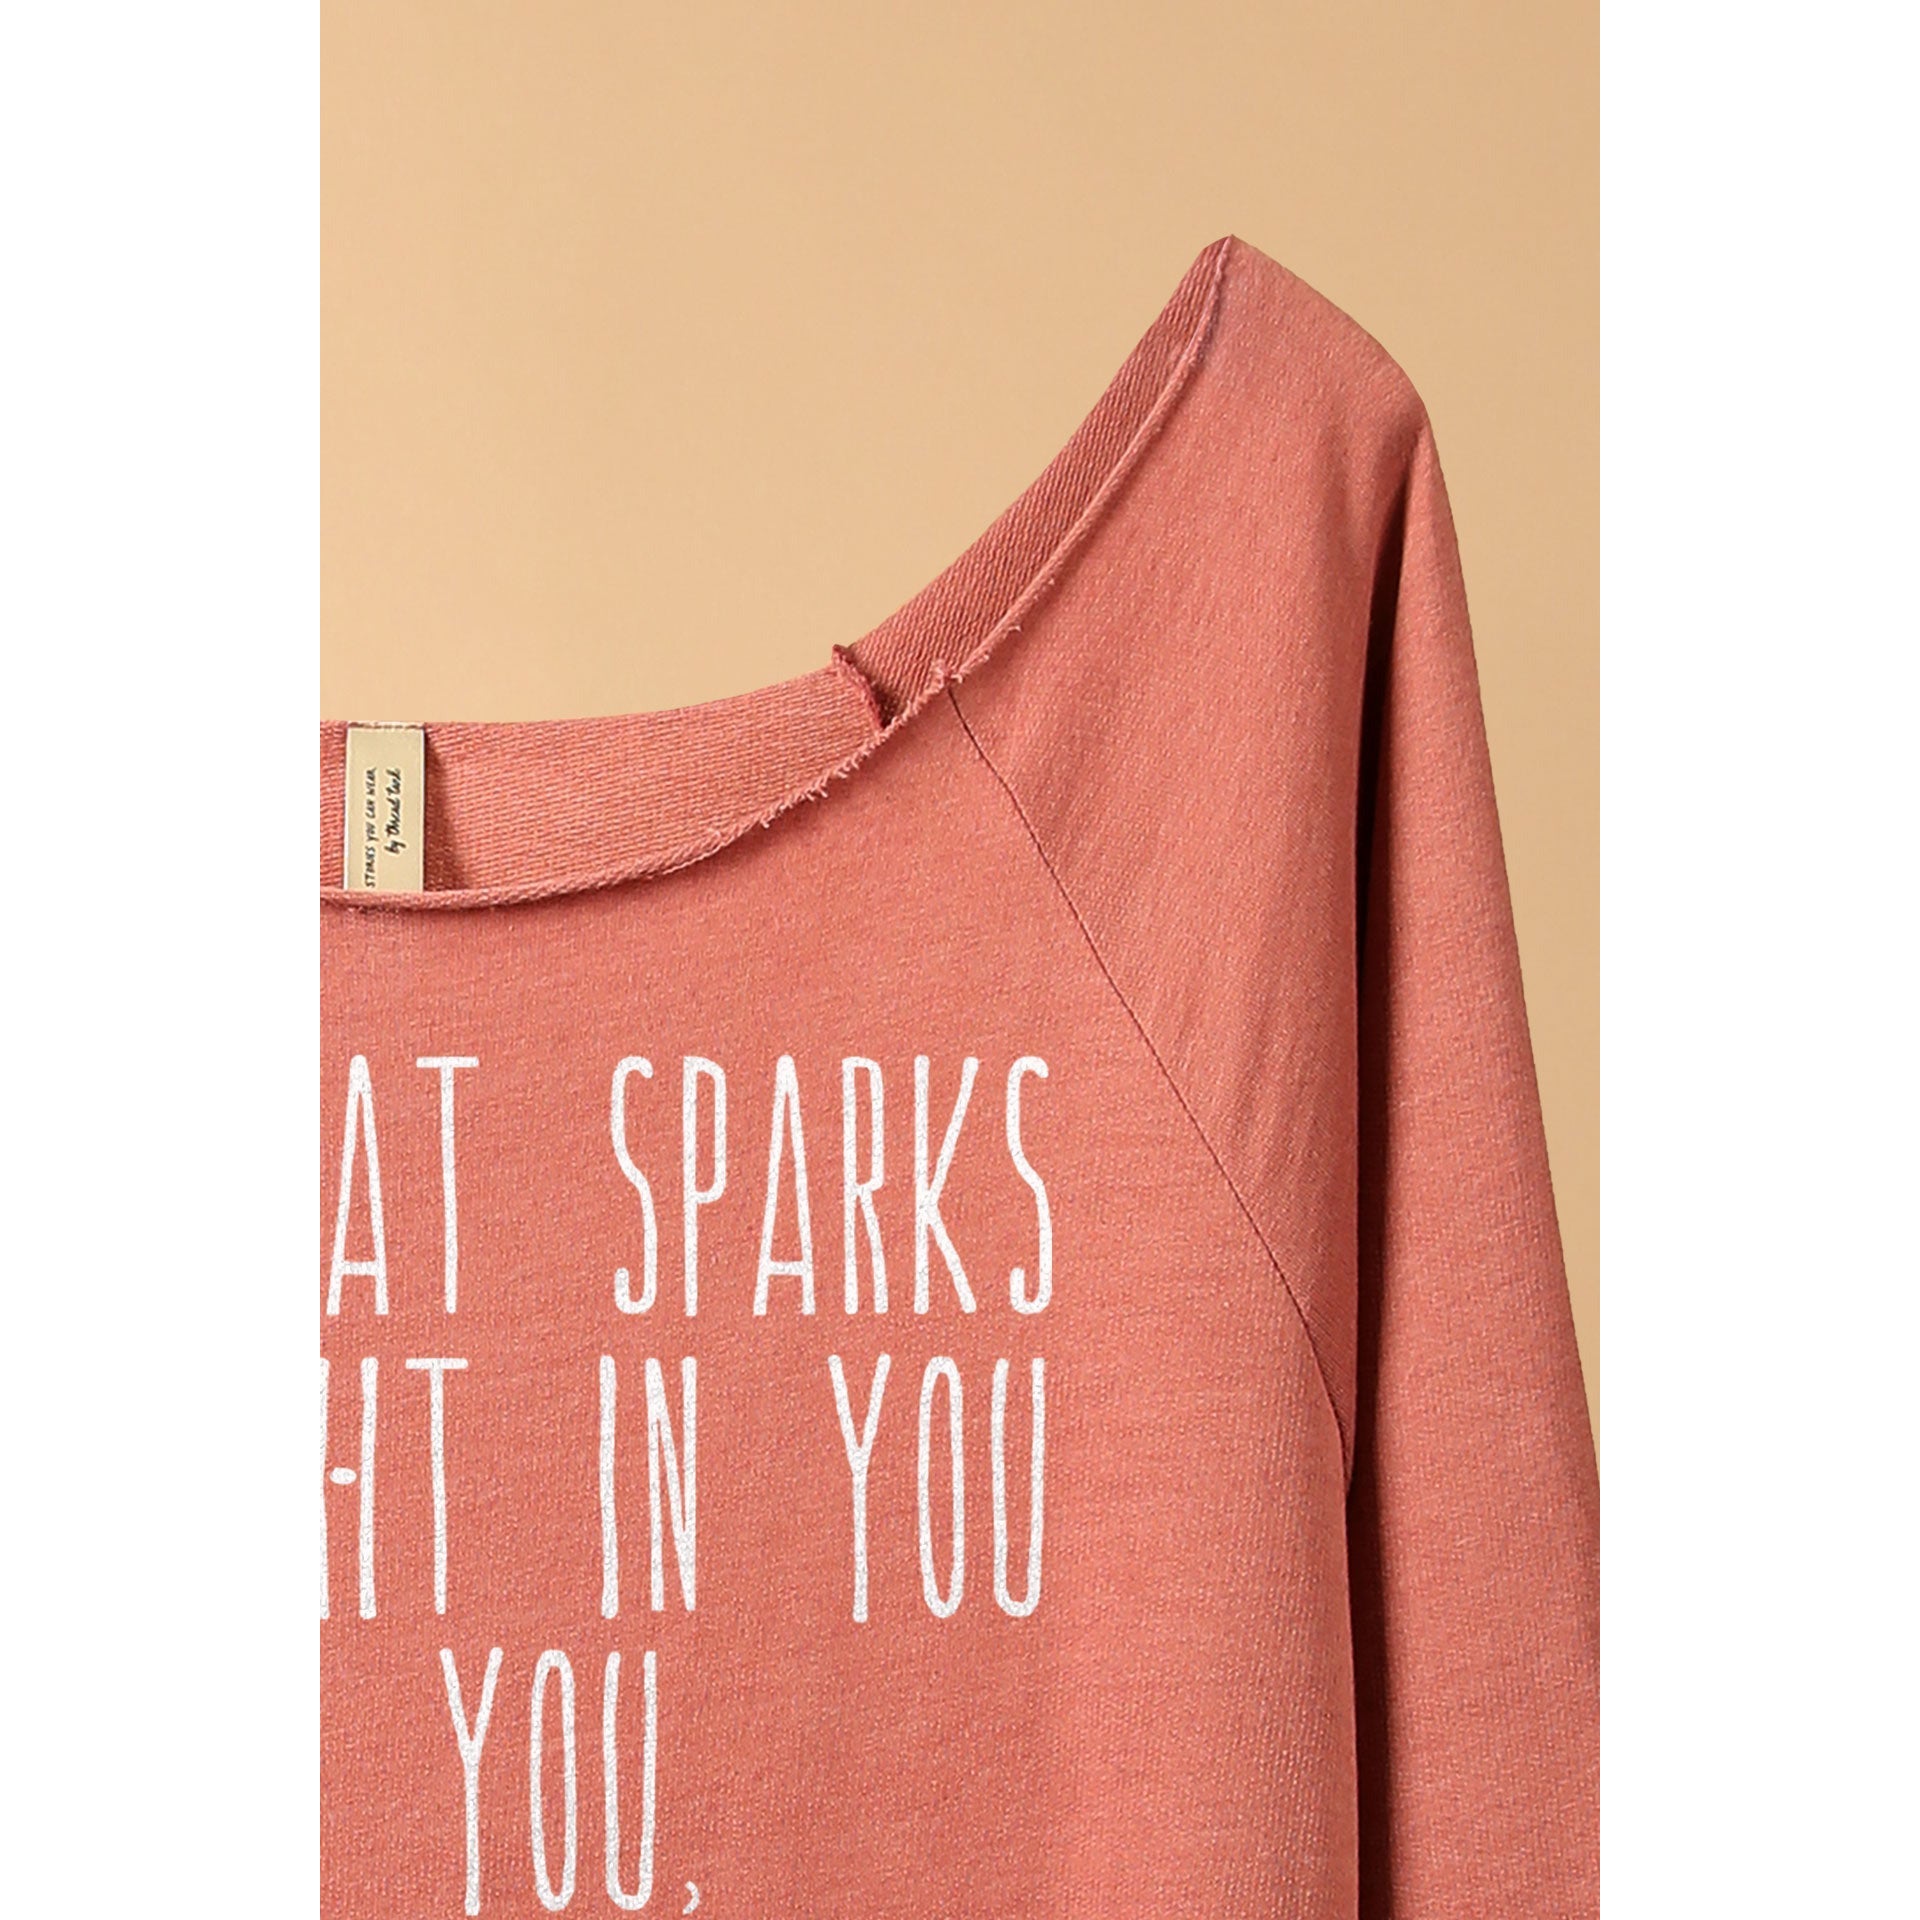 Know what sparks the light in you, illuminate the world - threadtank | stories you can wear